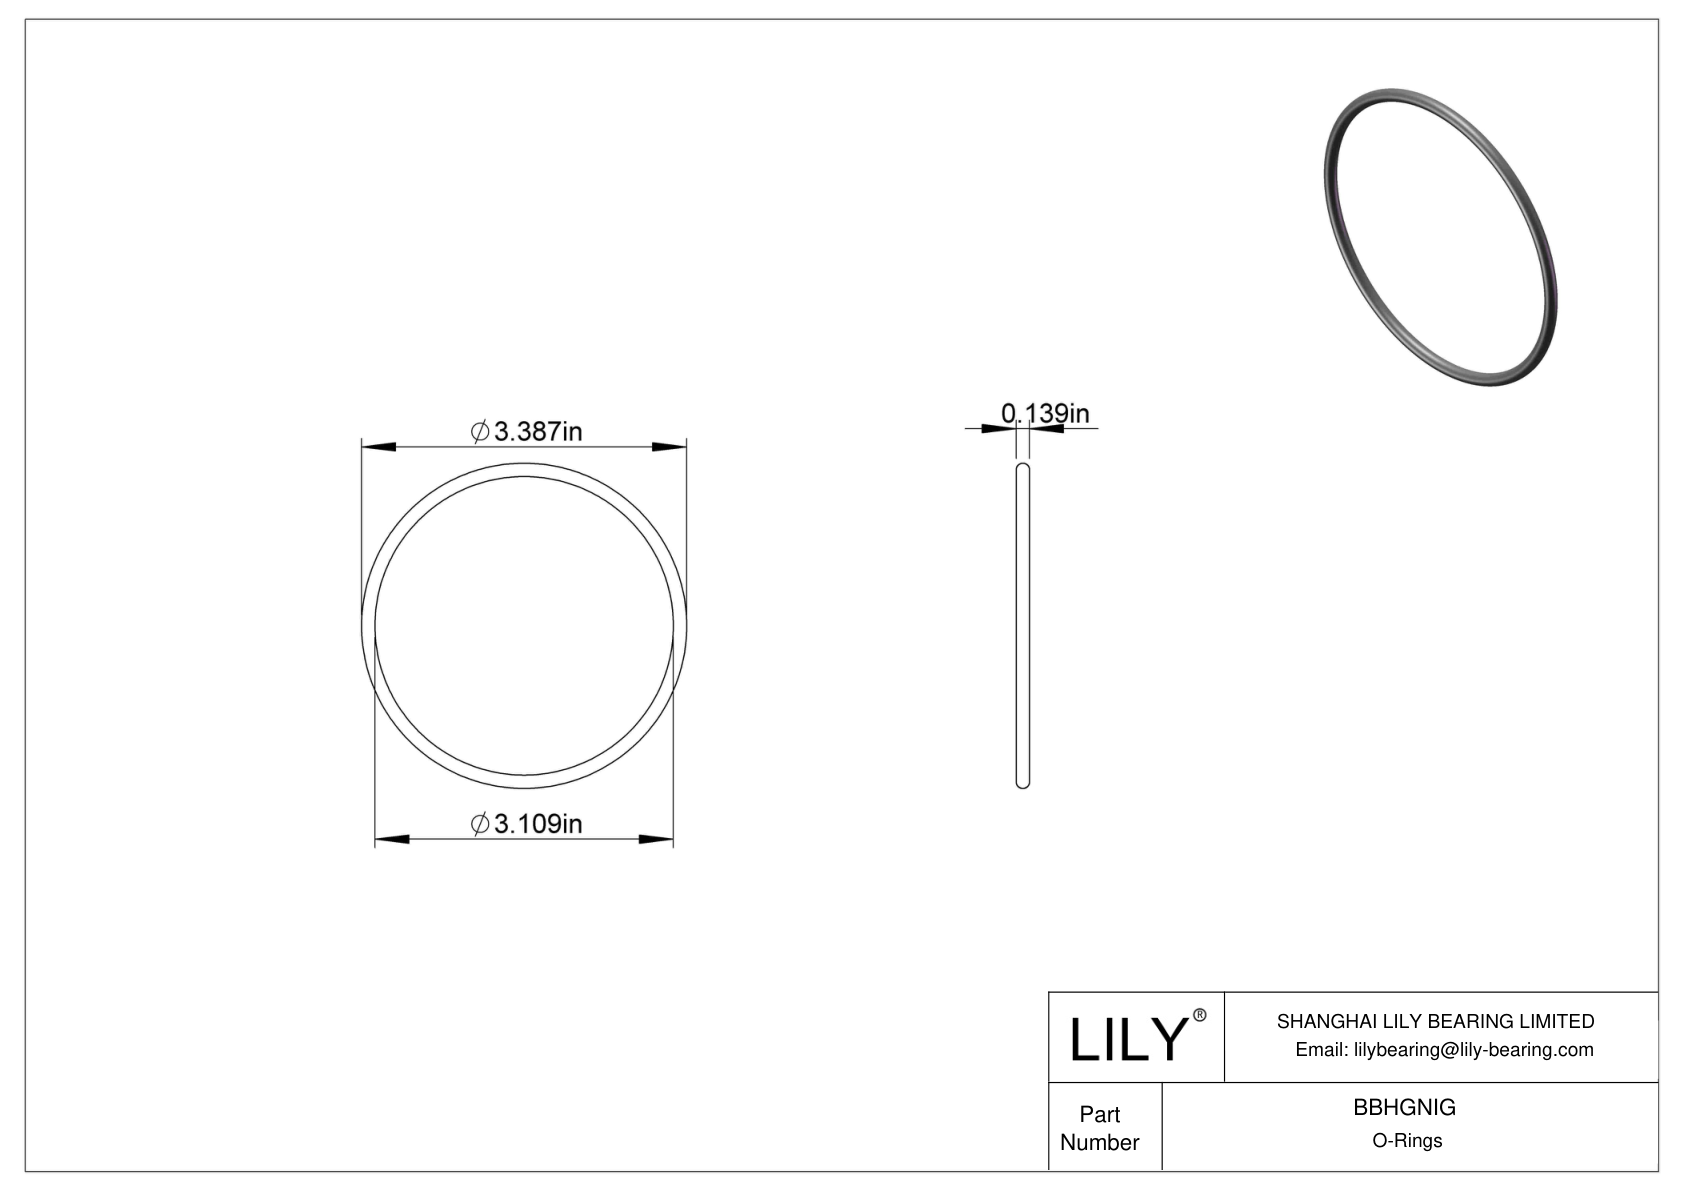 BBHGNIG Oil Resistant O-Rings Round cad drawing